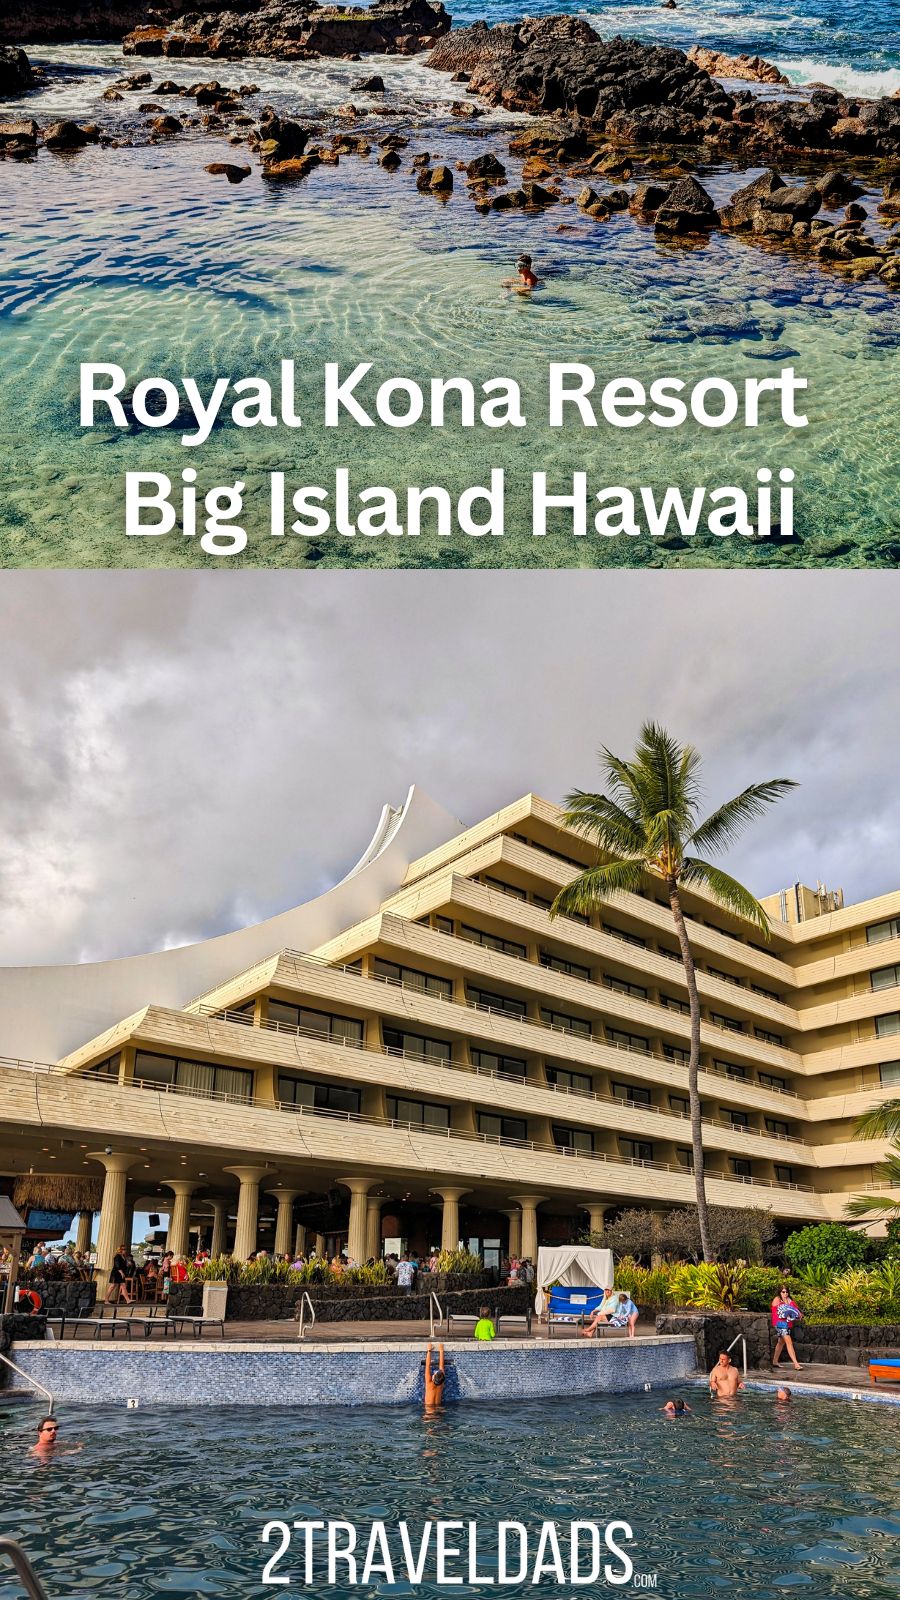 The Royal Kona Resort on the Big Island is a vintage Hawaii stay that, despite its age, is a great option in Kailua-Kona. From the Mai Tai bar to the private swimming cove, see what makes the Royal Kona our top pick for a family vacation on the Kona Coast.